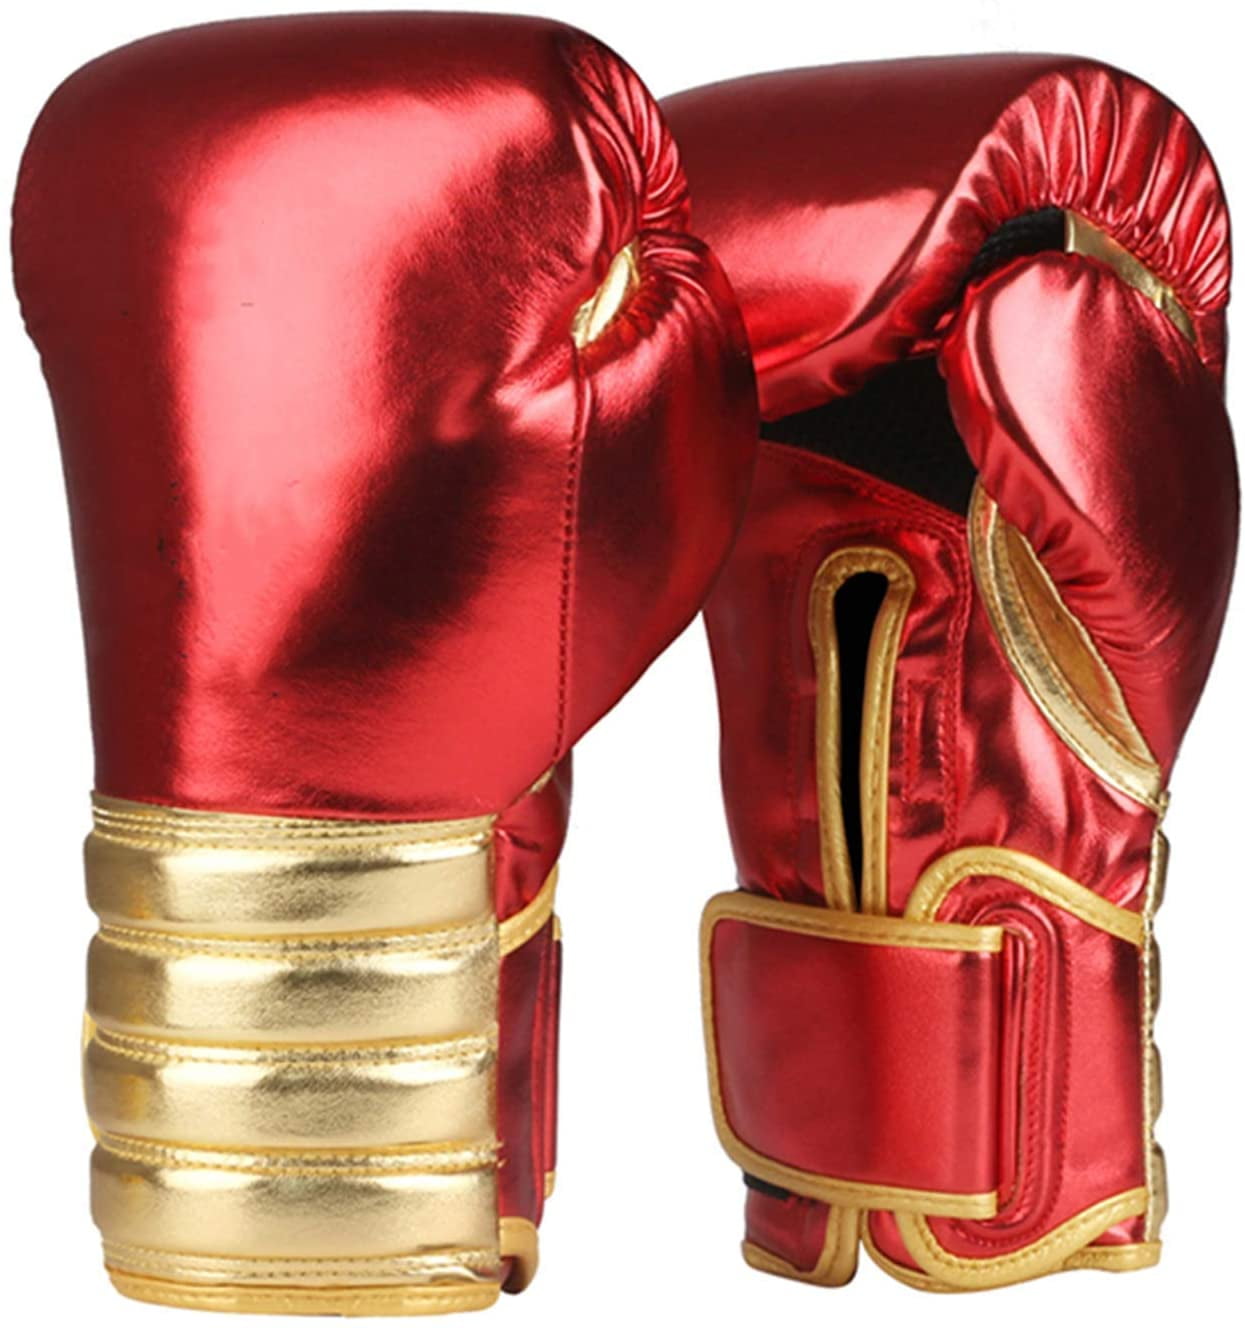 BOXING GLOVES COWHIDE GENUINE LEATHER PUNCH BAG FIGHT GYM TRAINING MMA MUAY THI 